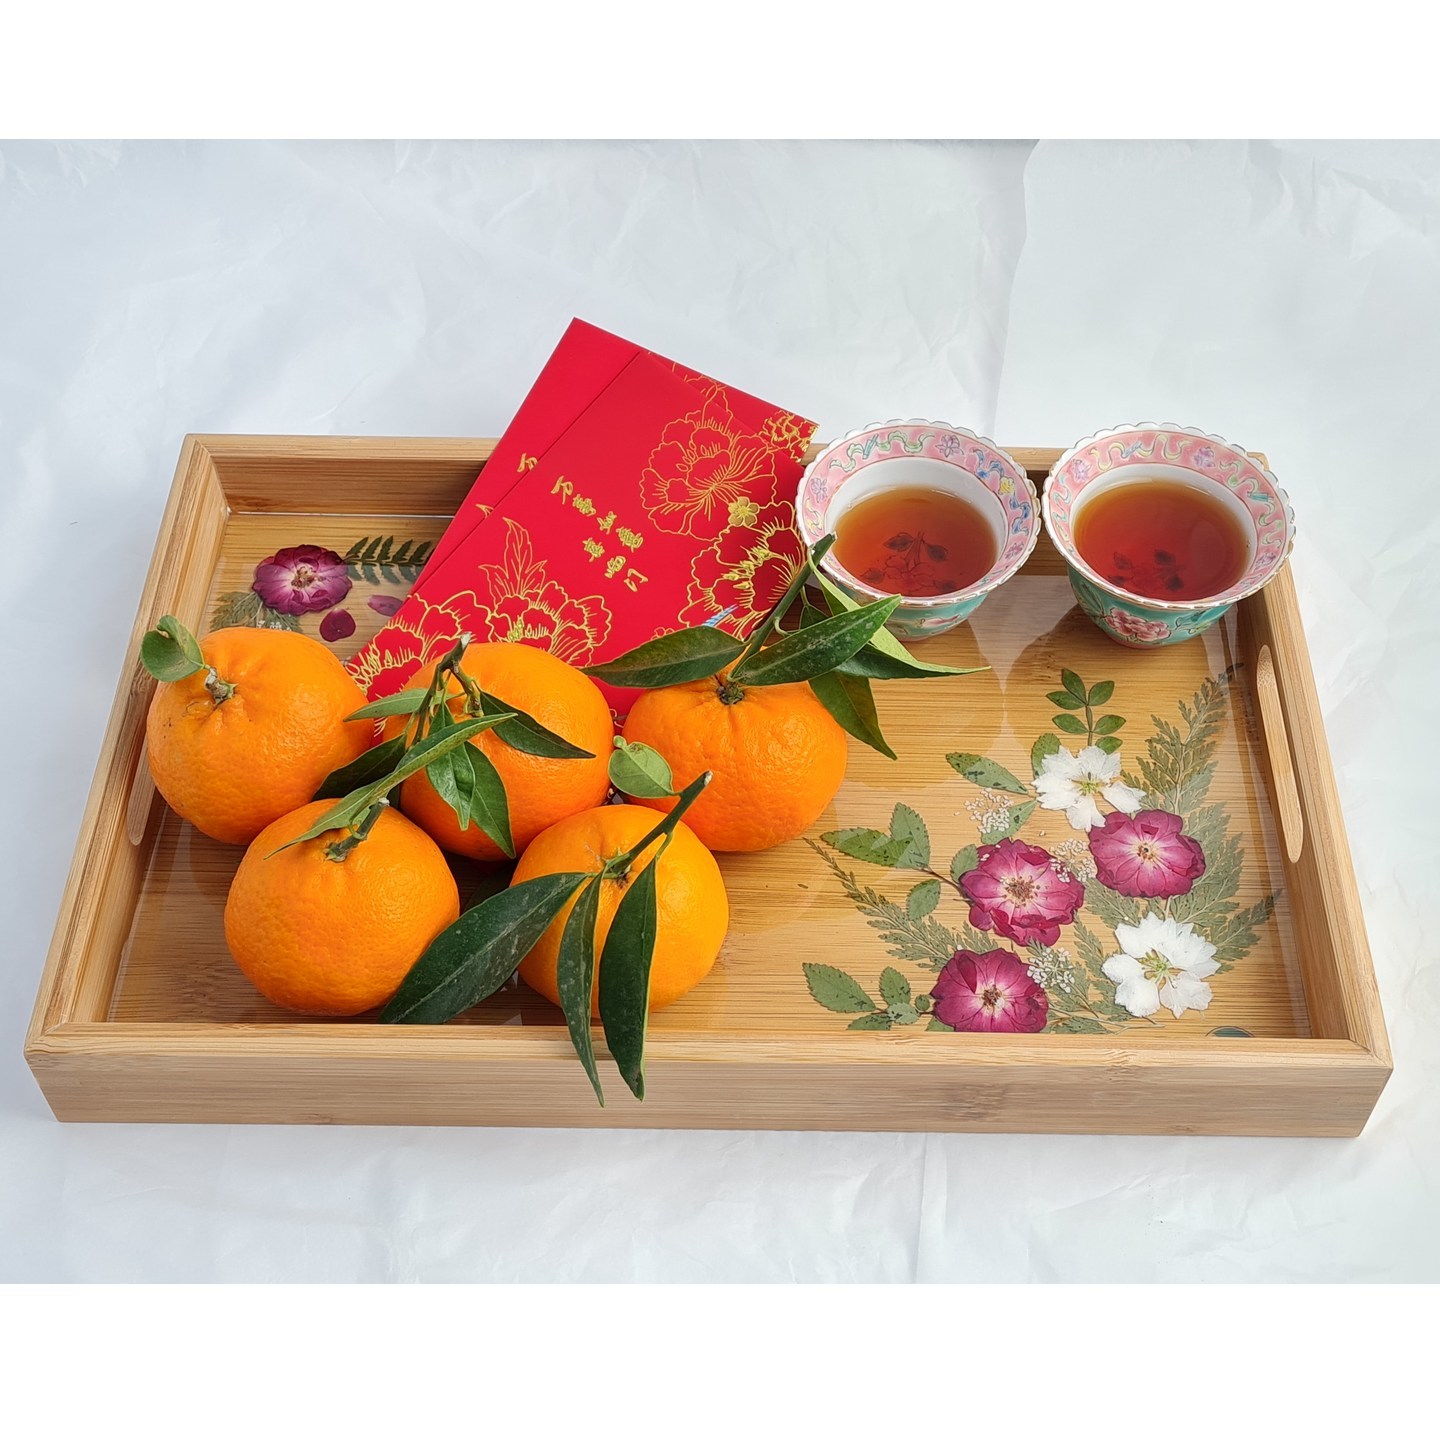 TIDINGS OF PEACE bamboo tray with handle in resin base with Real Pressed Flowers & Leaves Handmade